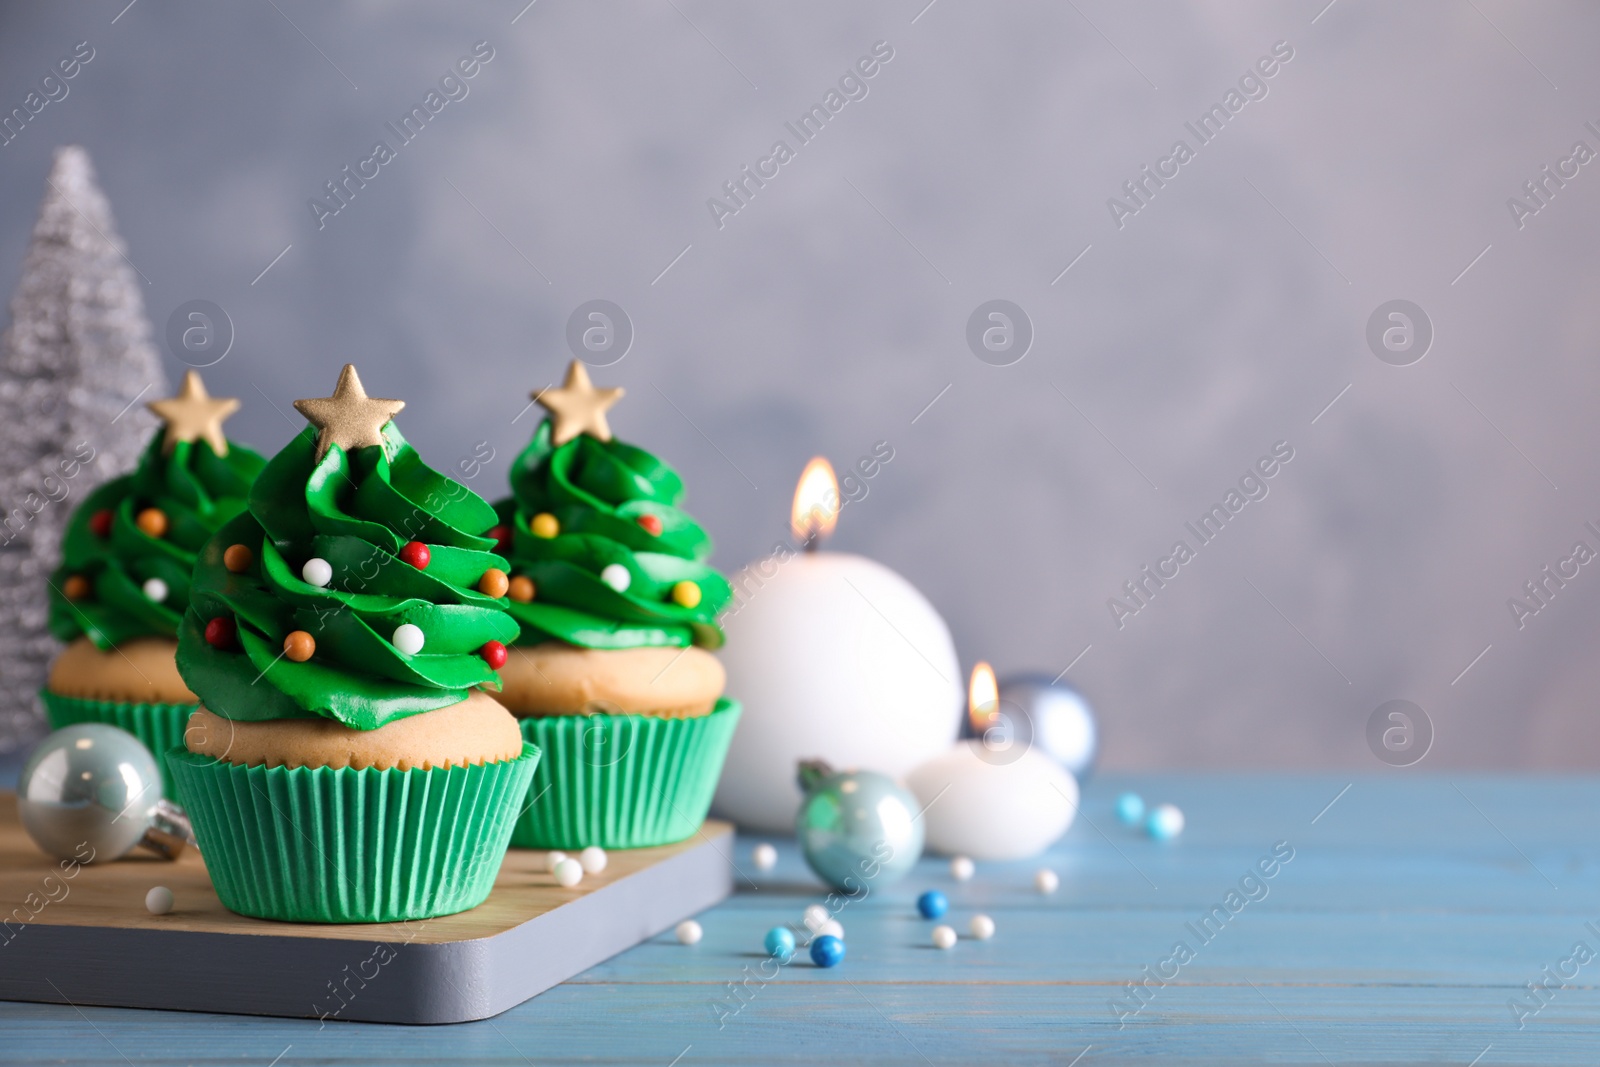 Photo of Christmas tree shaped cupcakes and decor on light blue wooden table. Space for text